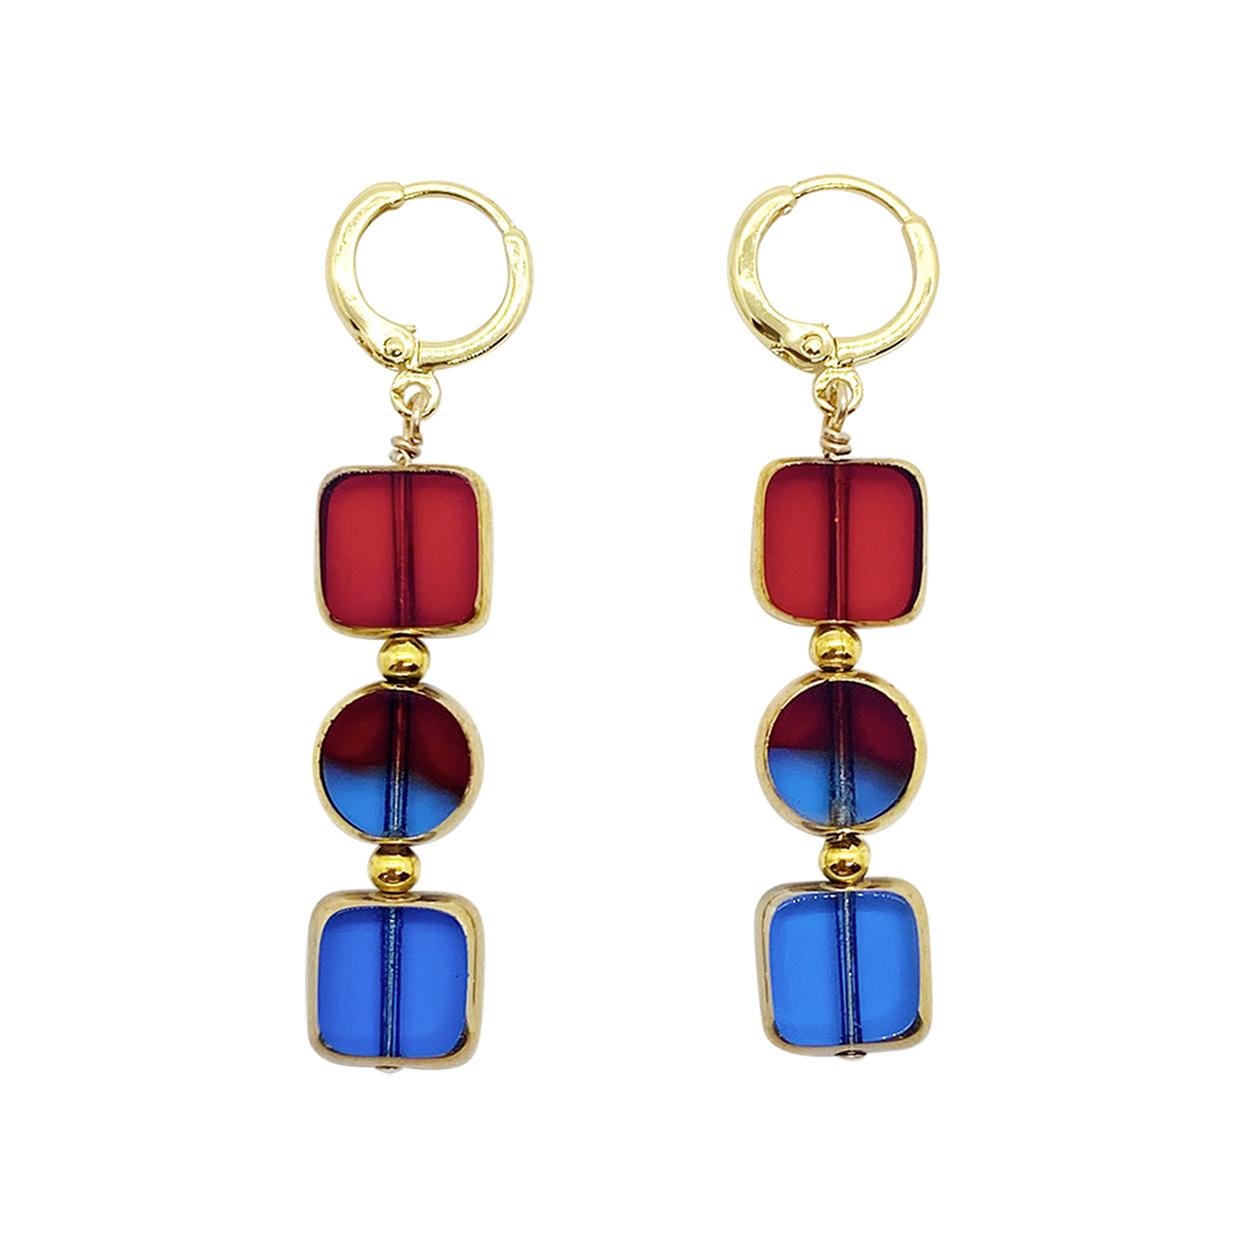 Blue & Red Translucent German Beads edged with 24K Gold